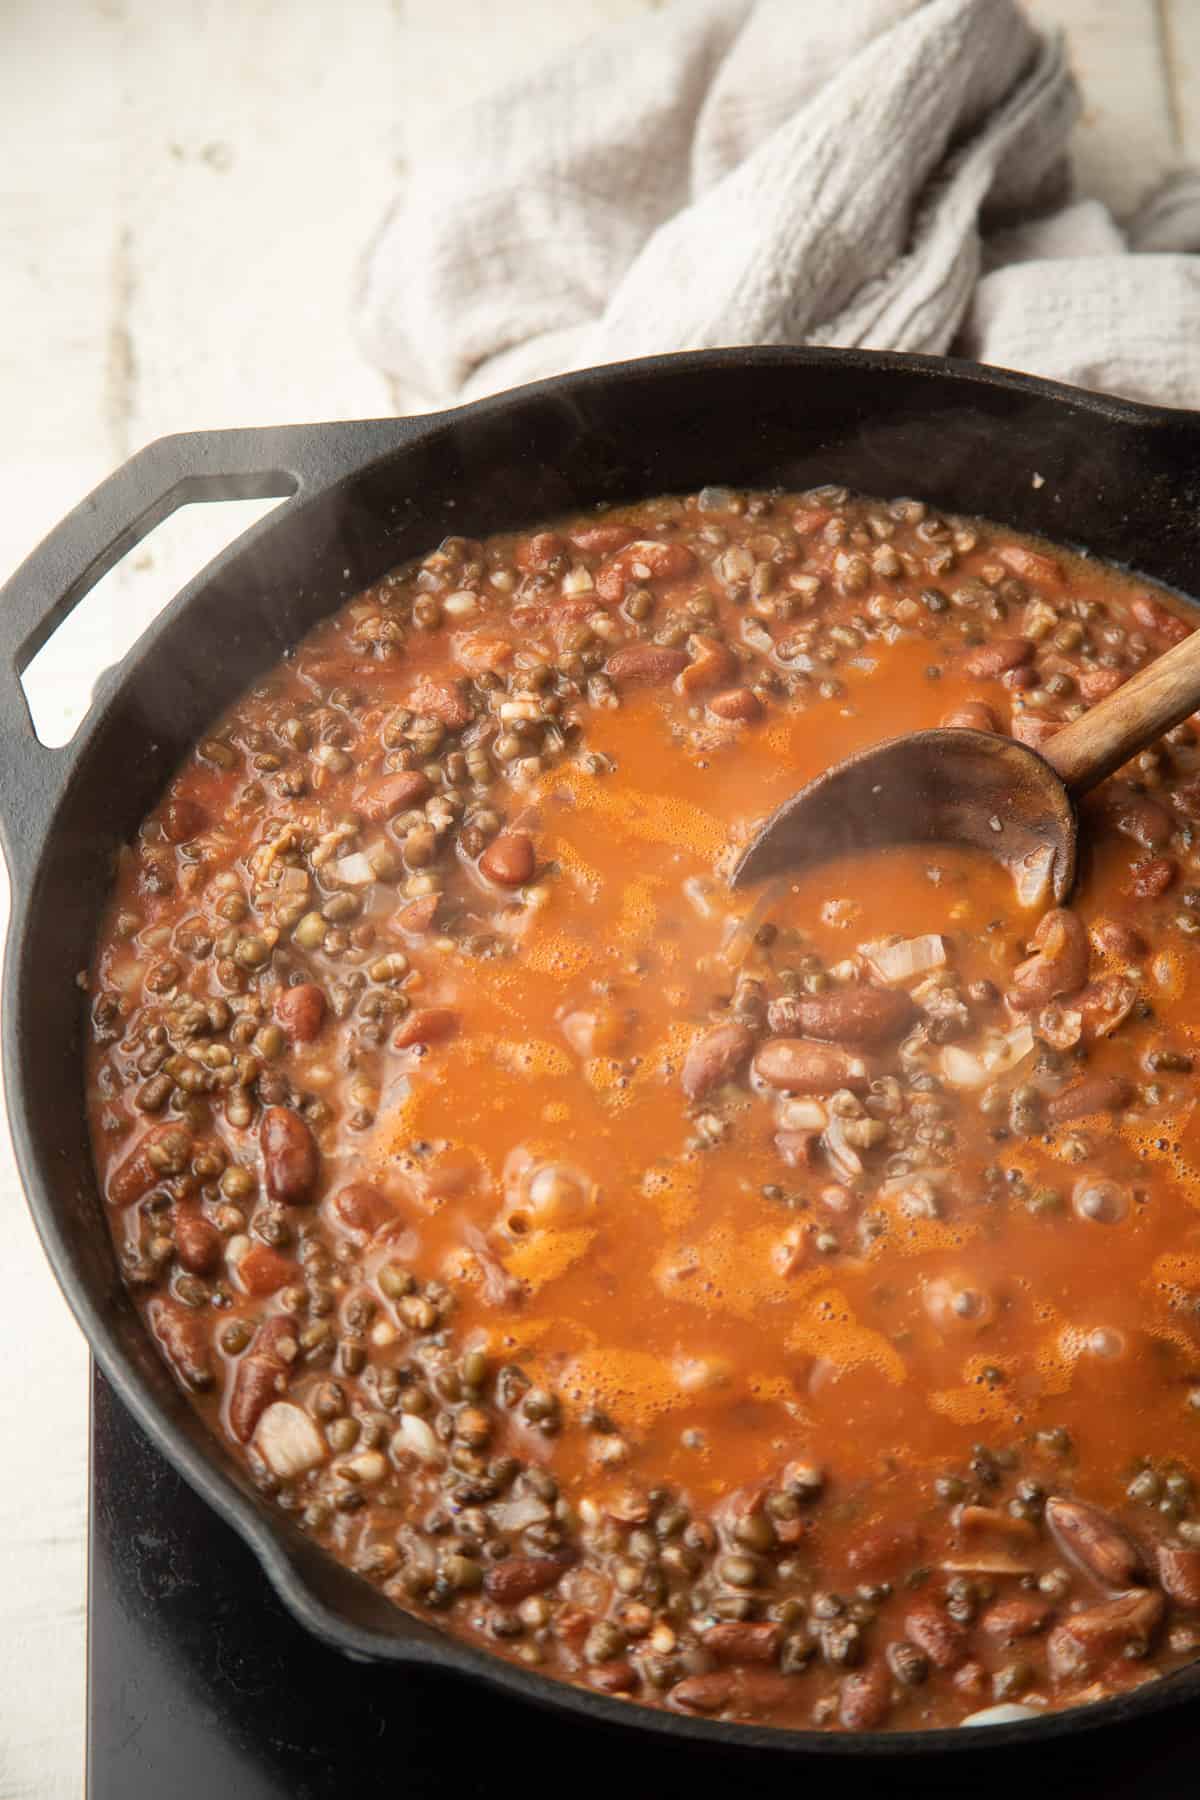 Spoon stirring tomato puree into a skillet of lentils and beans to make Vegan Dal Makhani.